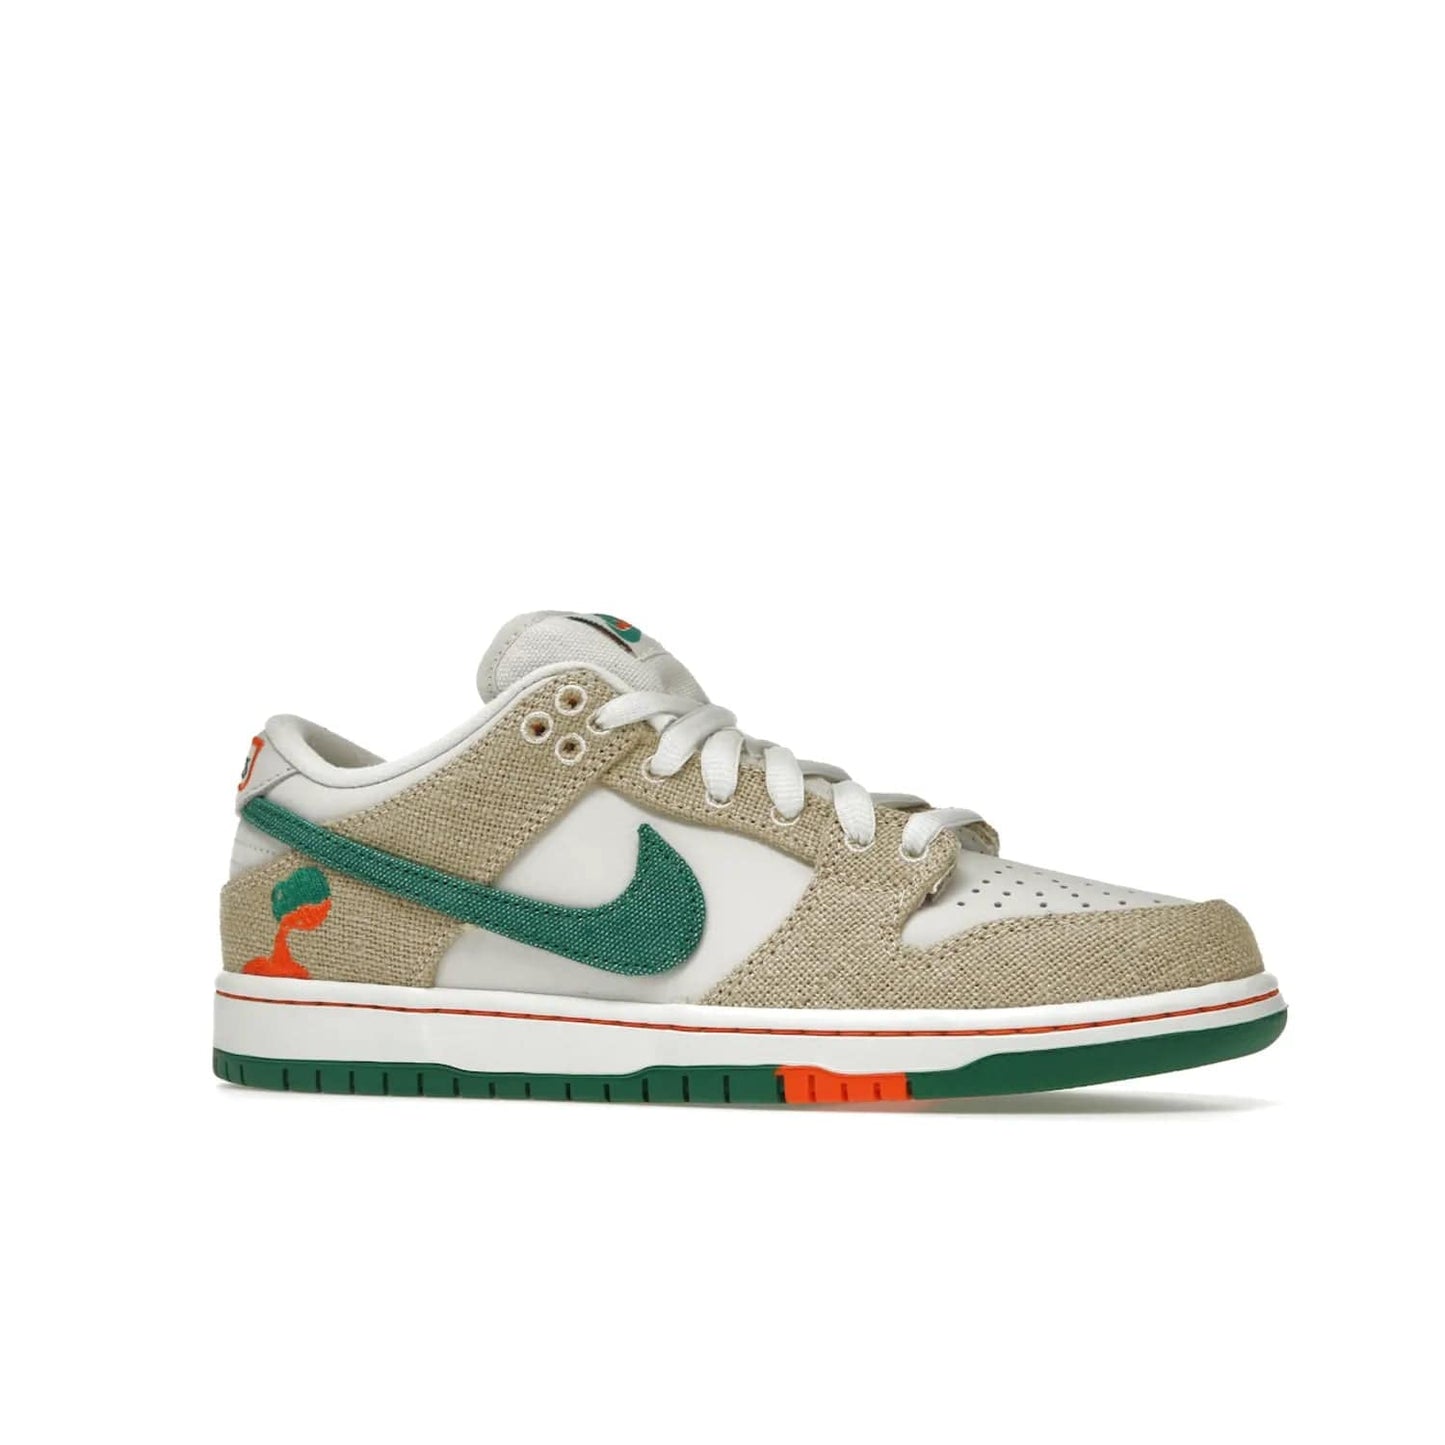 Nike SB Dunk Low Jarritos - Image 3 - Only at www.BallersClubKickz.com - Shop limited edition Nike SB Dunk Low Jarritos! Crafted with white leather and tear-away canvas materials with green accents. Includes orange, green, and white laces to customize your look. Available now.